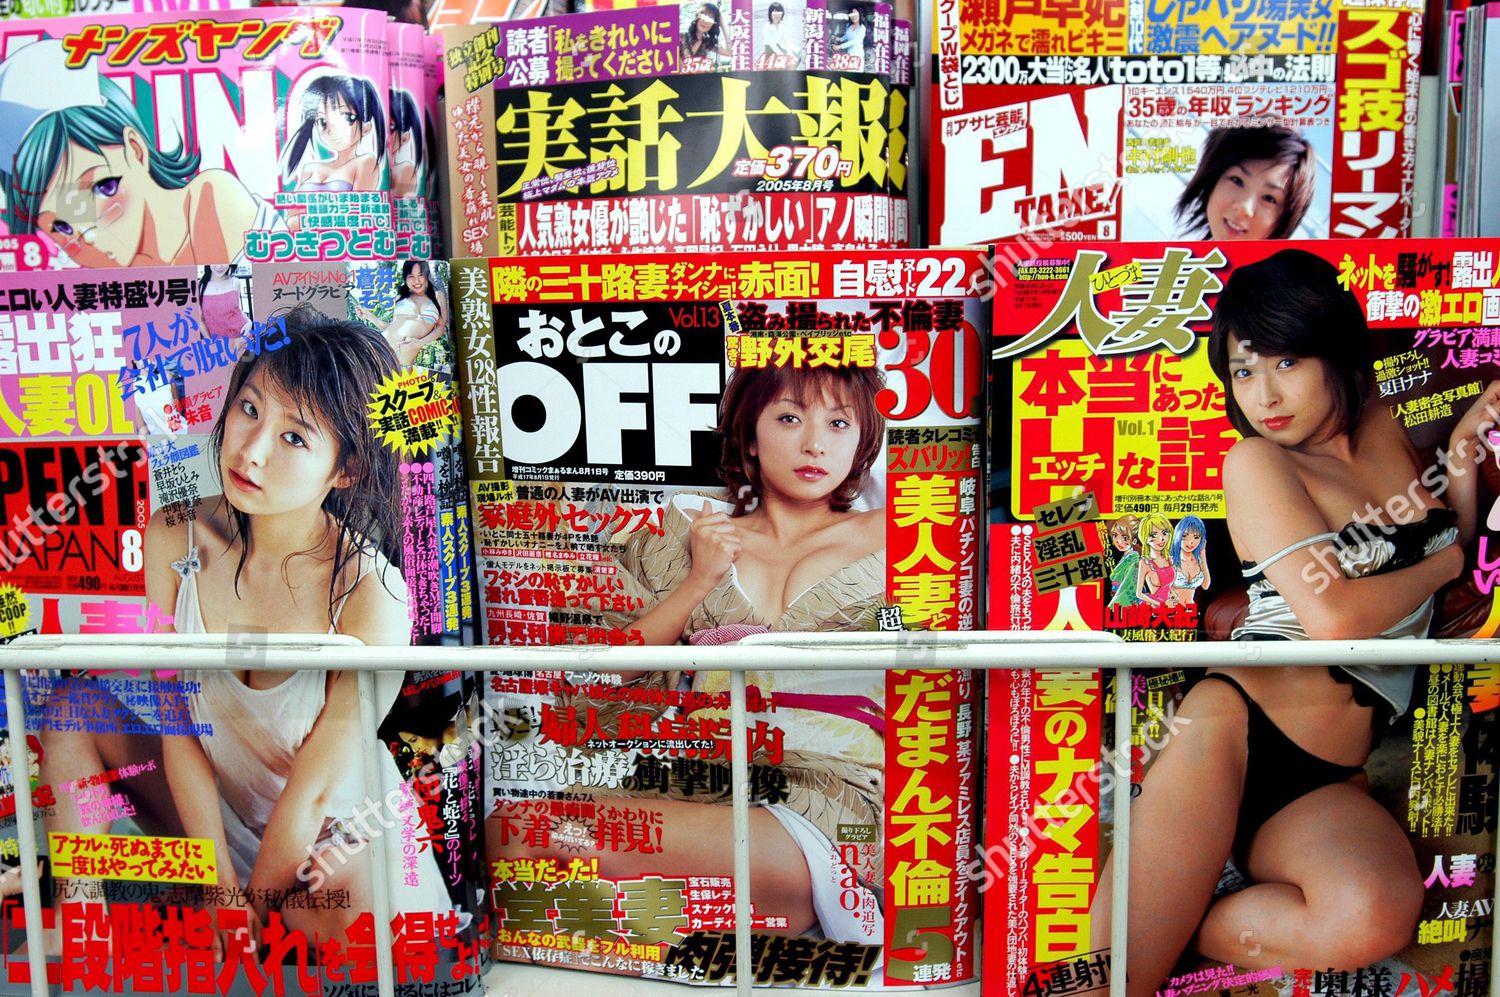 Japan Porn Magazines - Soft Porn Japanese Magazines On Rack Downtown Editorial ...